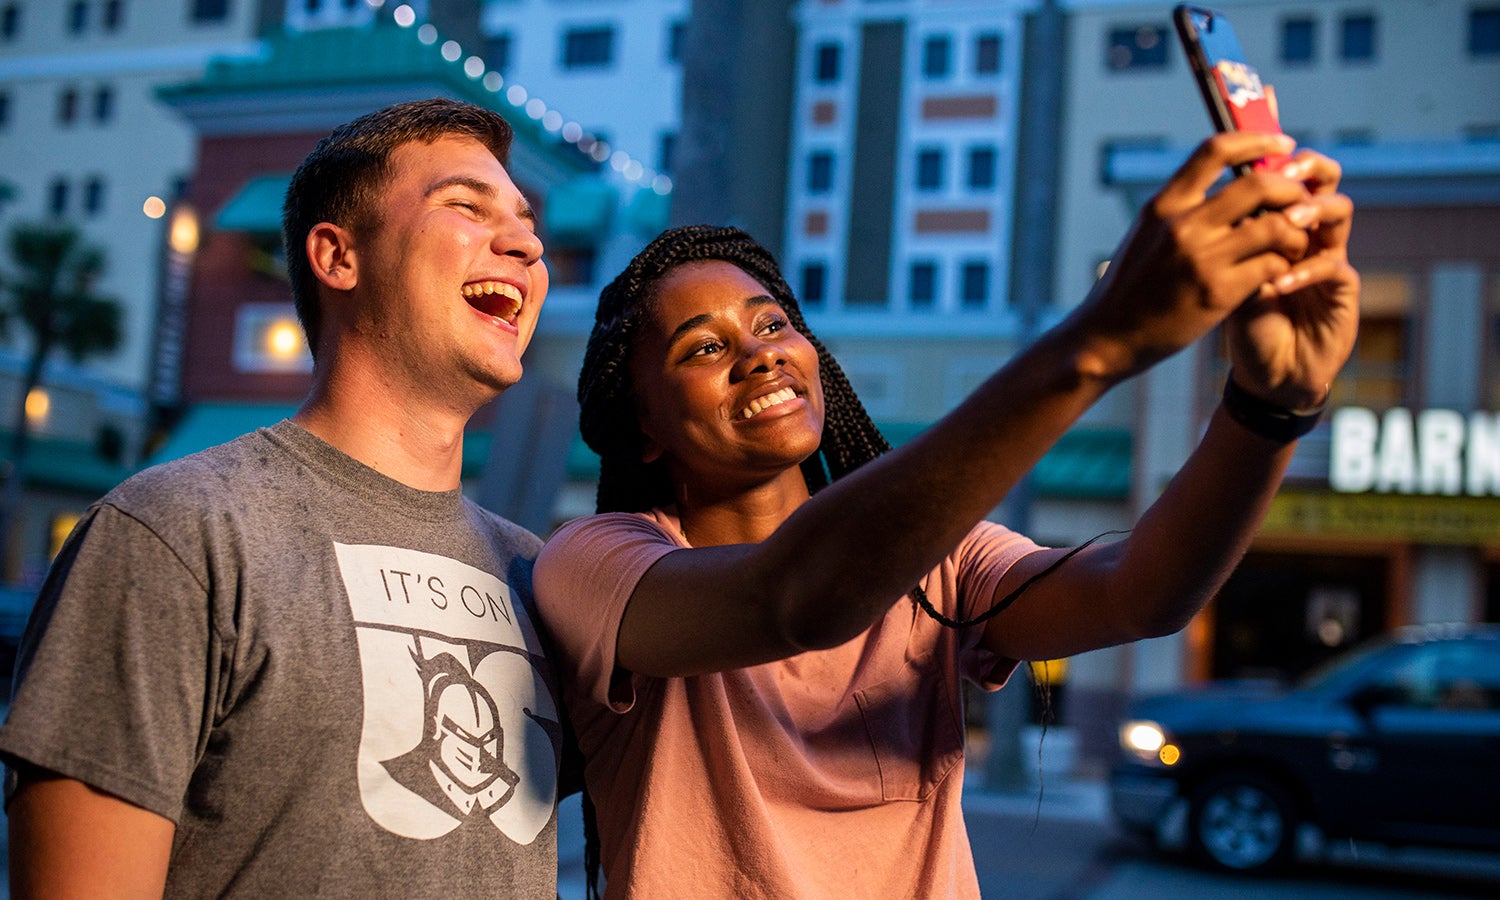 Students taking selfies to post on UCF Social channels.